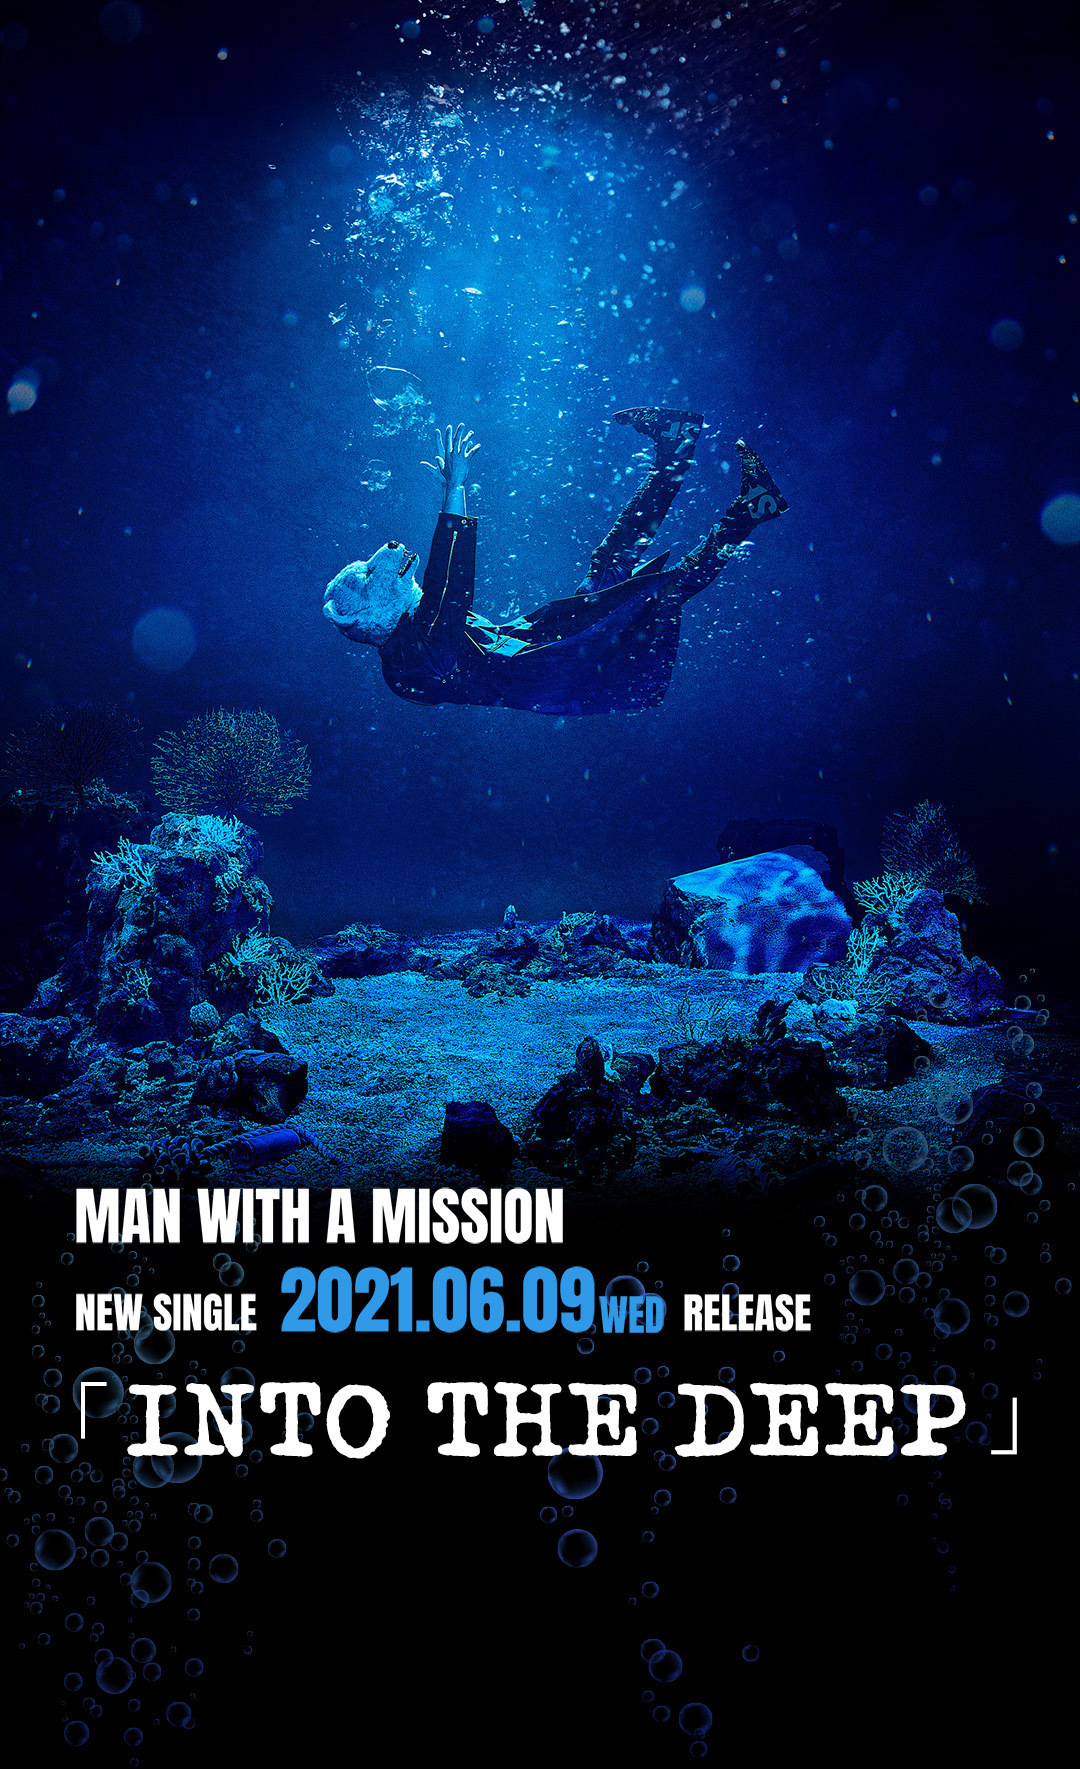 6.9(Wed) RELEASE『In the deep』特設サイト | MAN WITH A MISSION